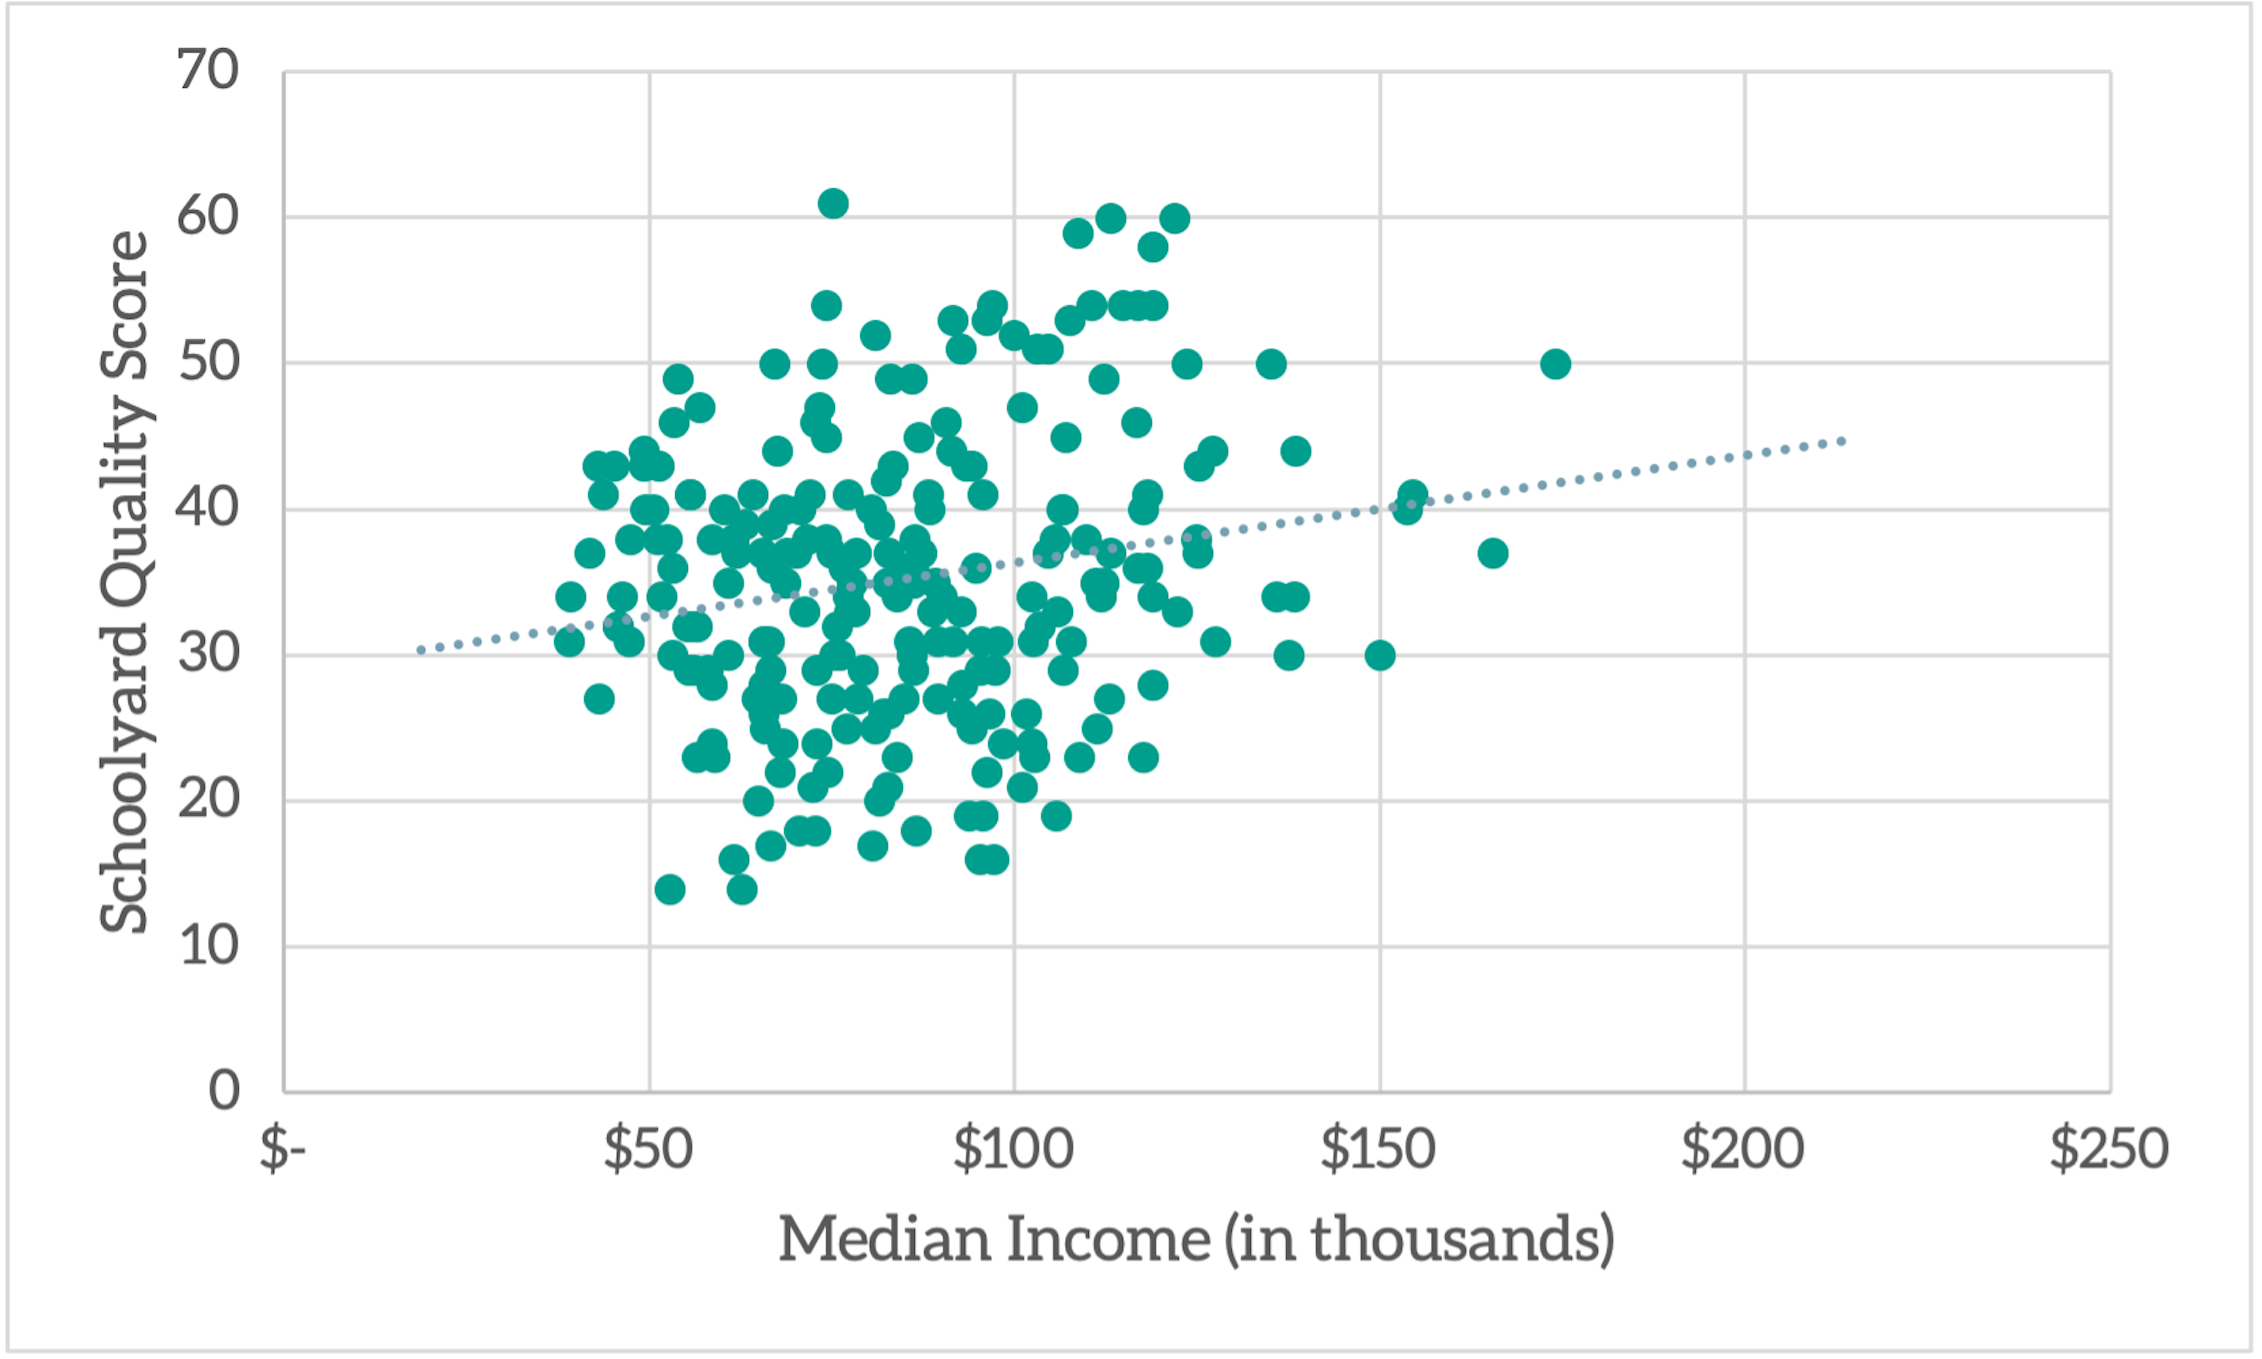 Scatterplot with schools' median income (in thousands) plotted on the x-axis against schools' Schoolyard Quality Scores; line is fitted to data with positive slope